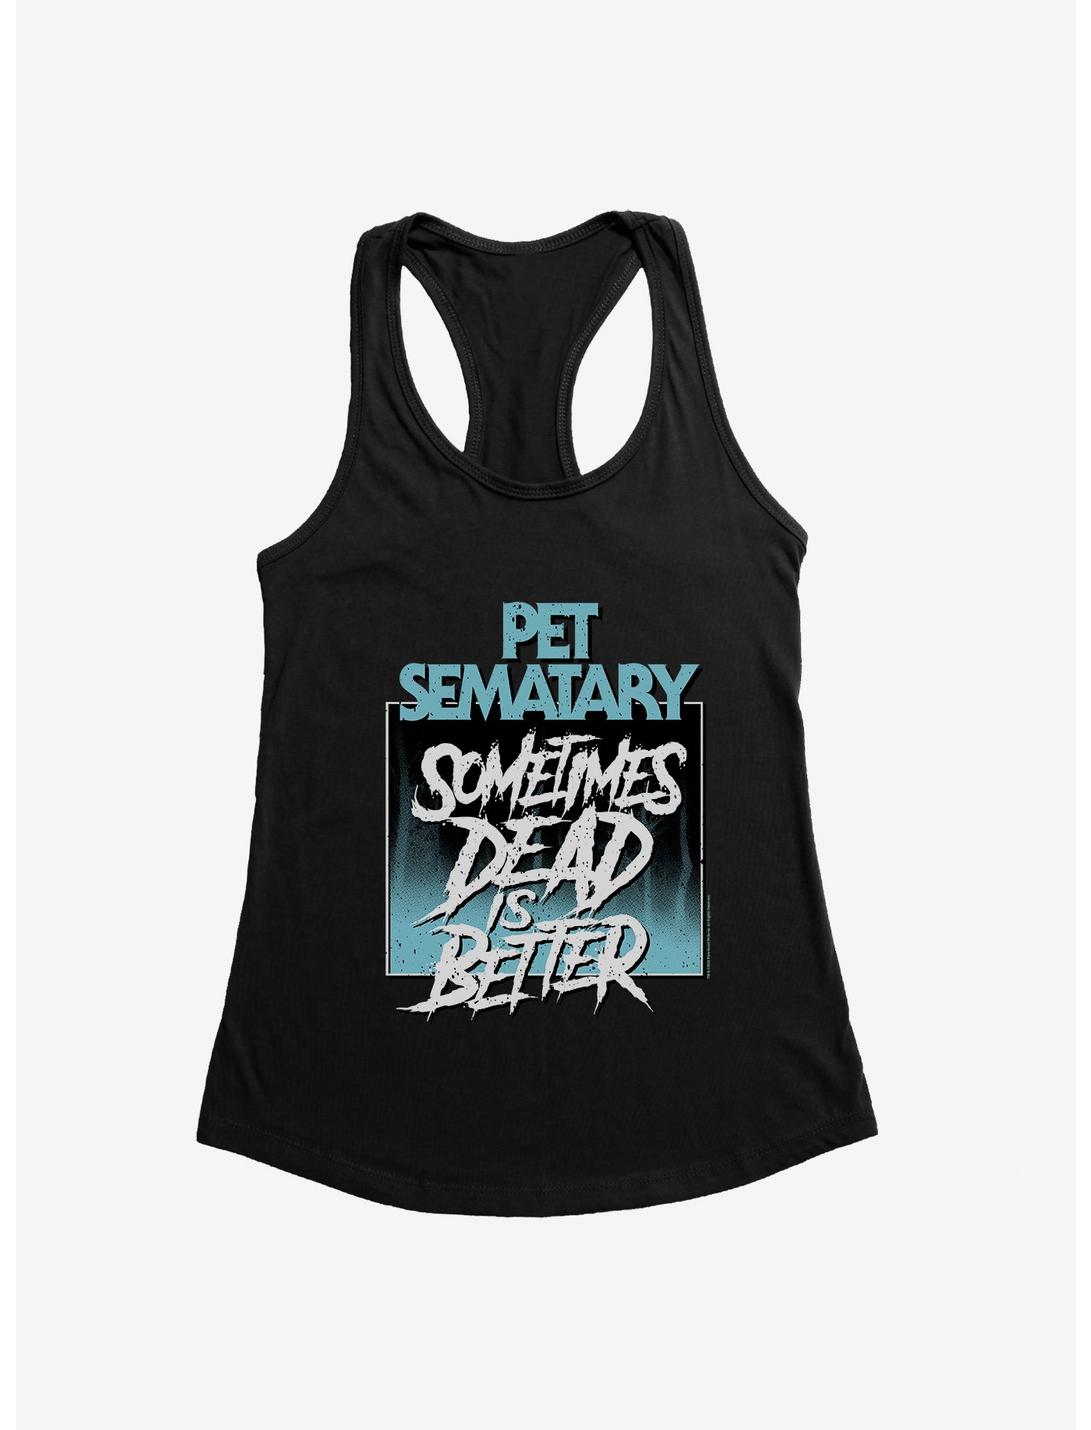 Pet Sematary Sometimes Dead Is Better Womens Tank Top, BLACK, hi-res